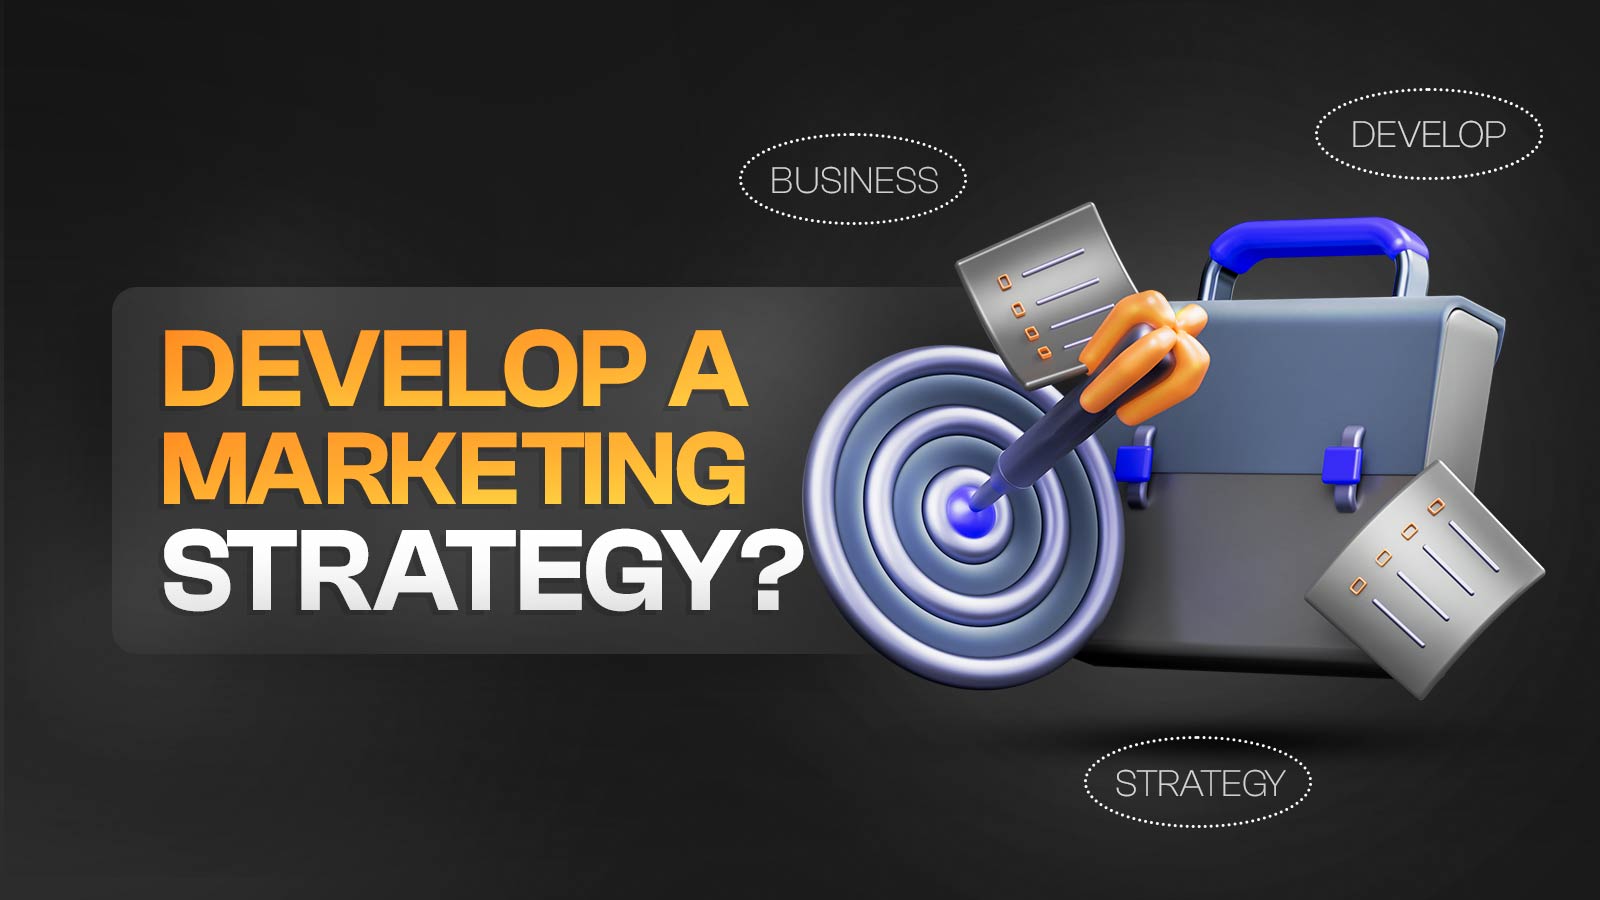 Why Would A Business Want To Develop A Marketing Strategy?